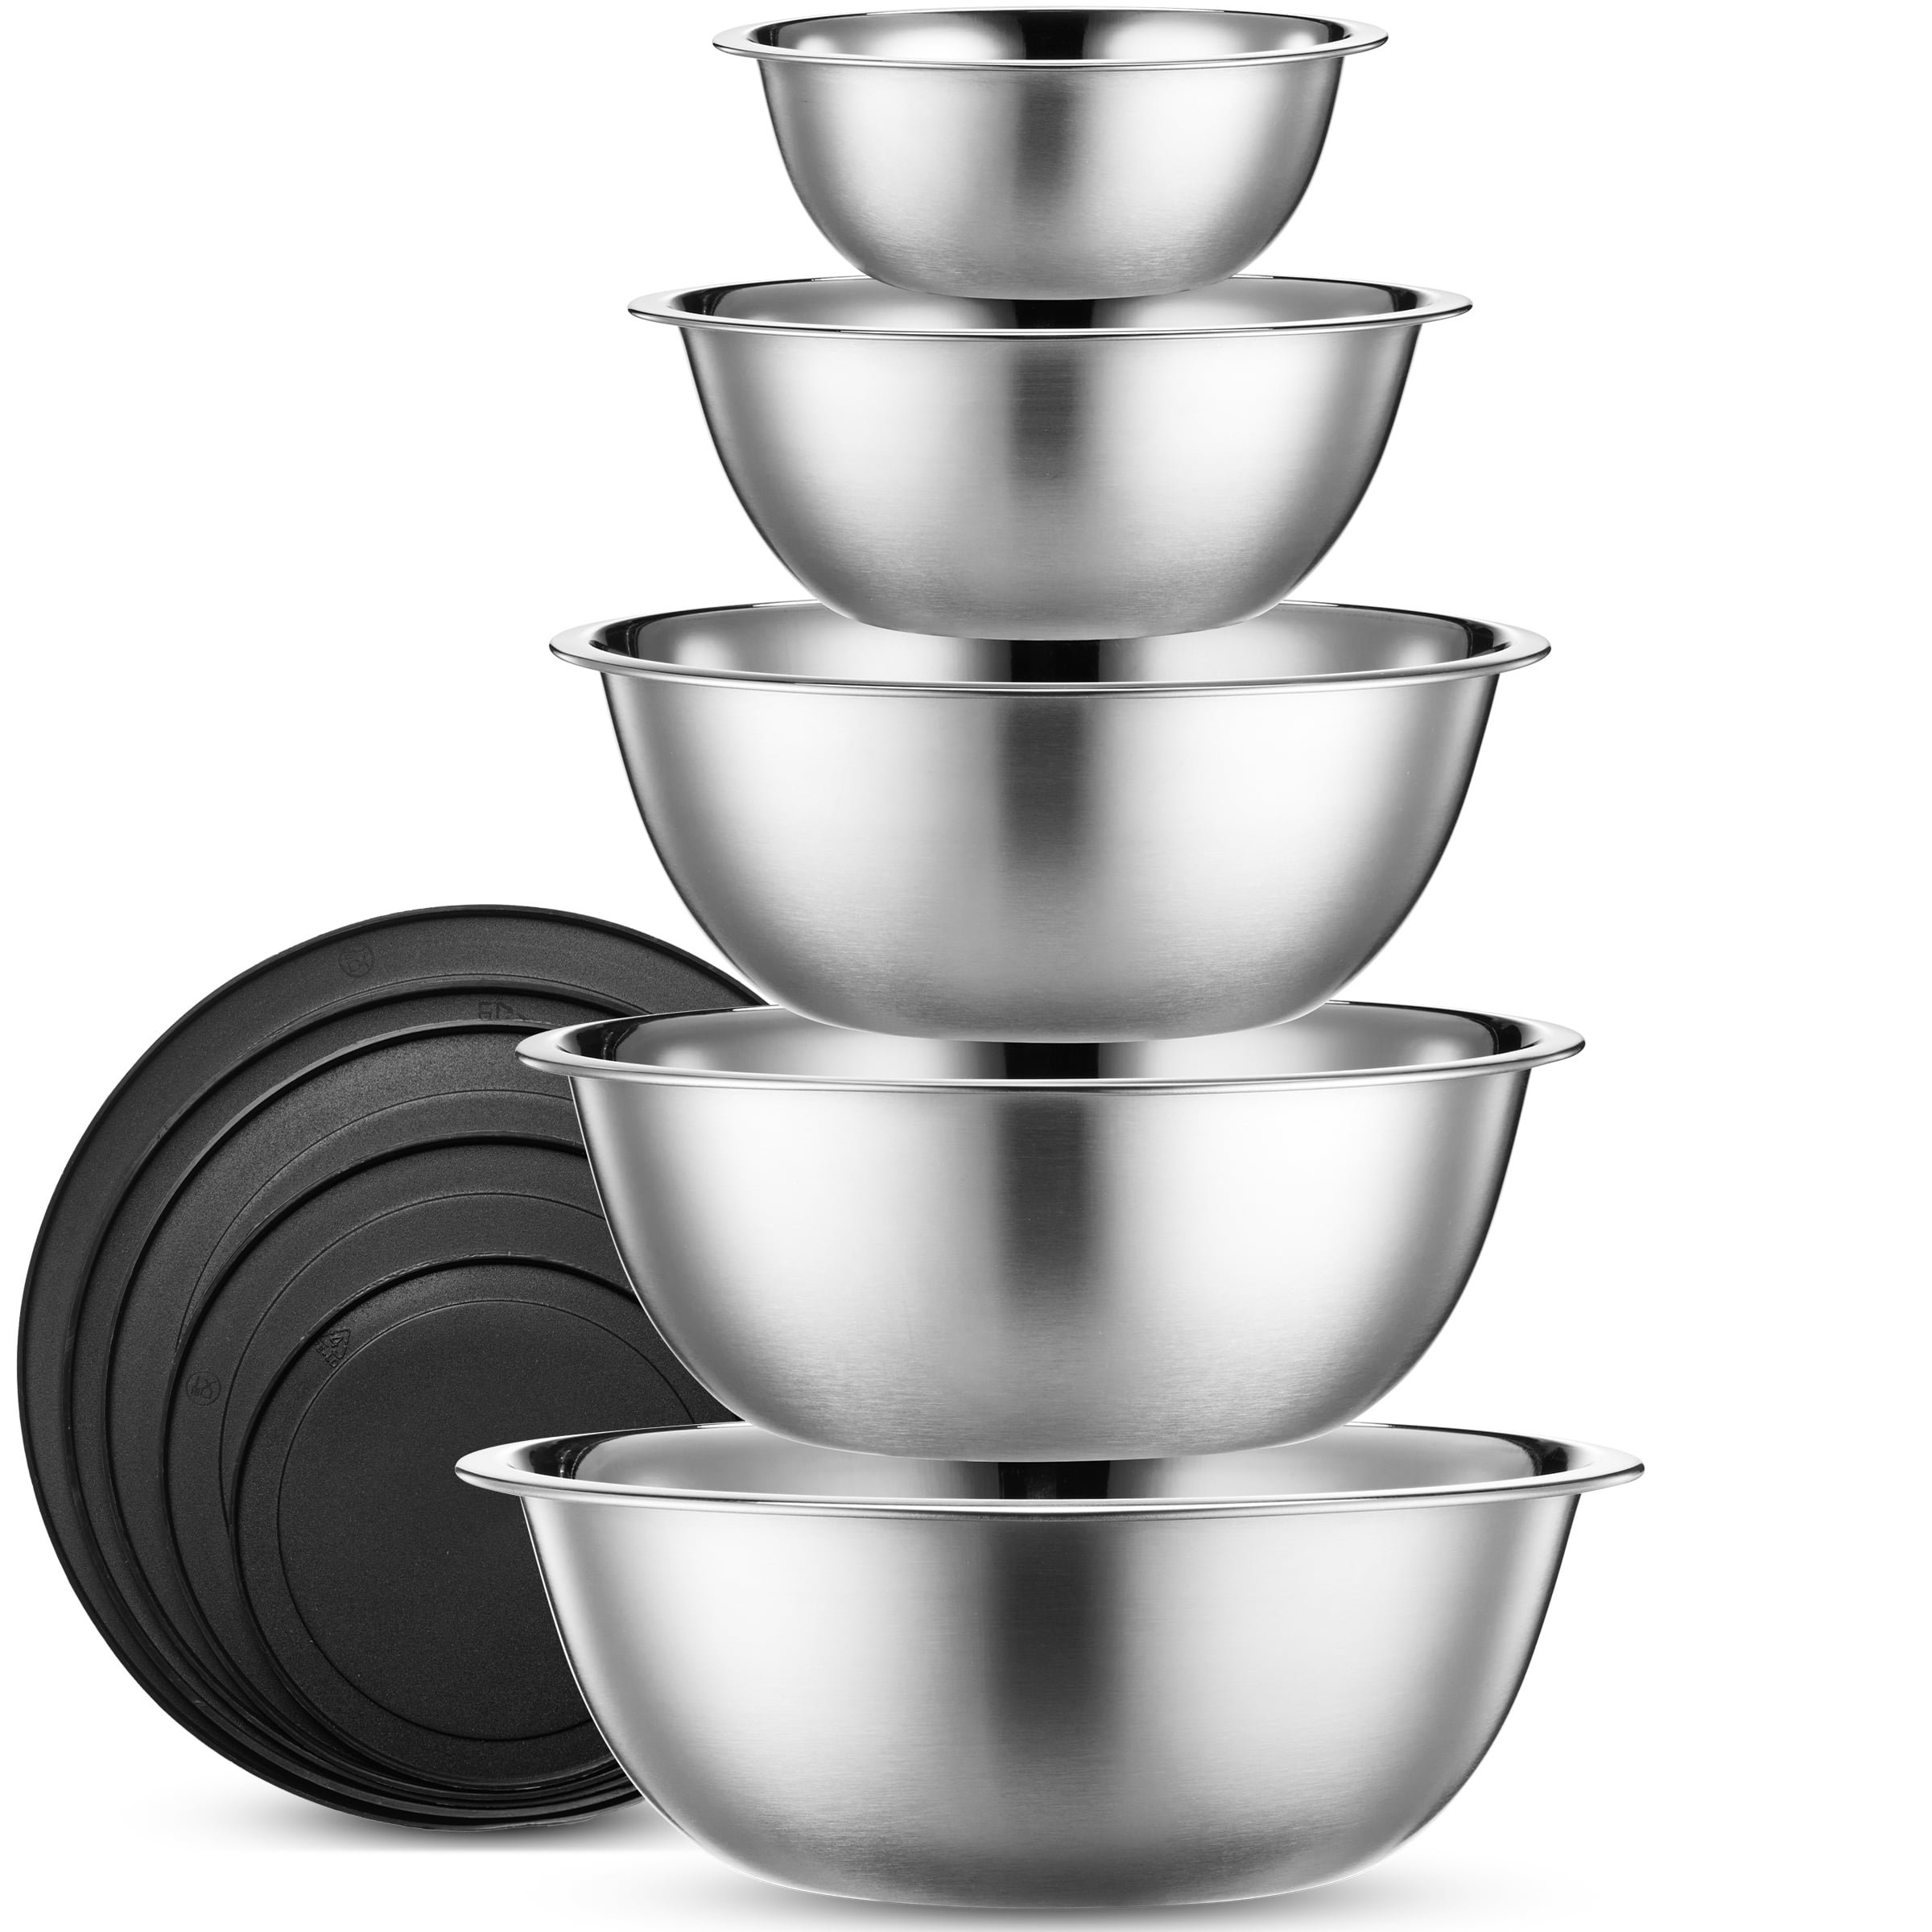 Prepology 3-pc Microwave- Safe Stainless Steel Mixing Bowls w